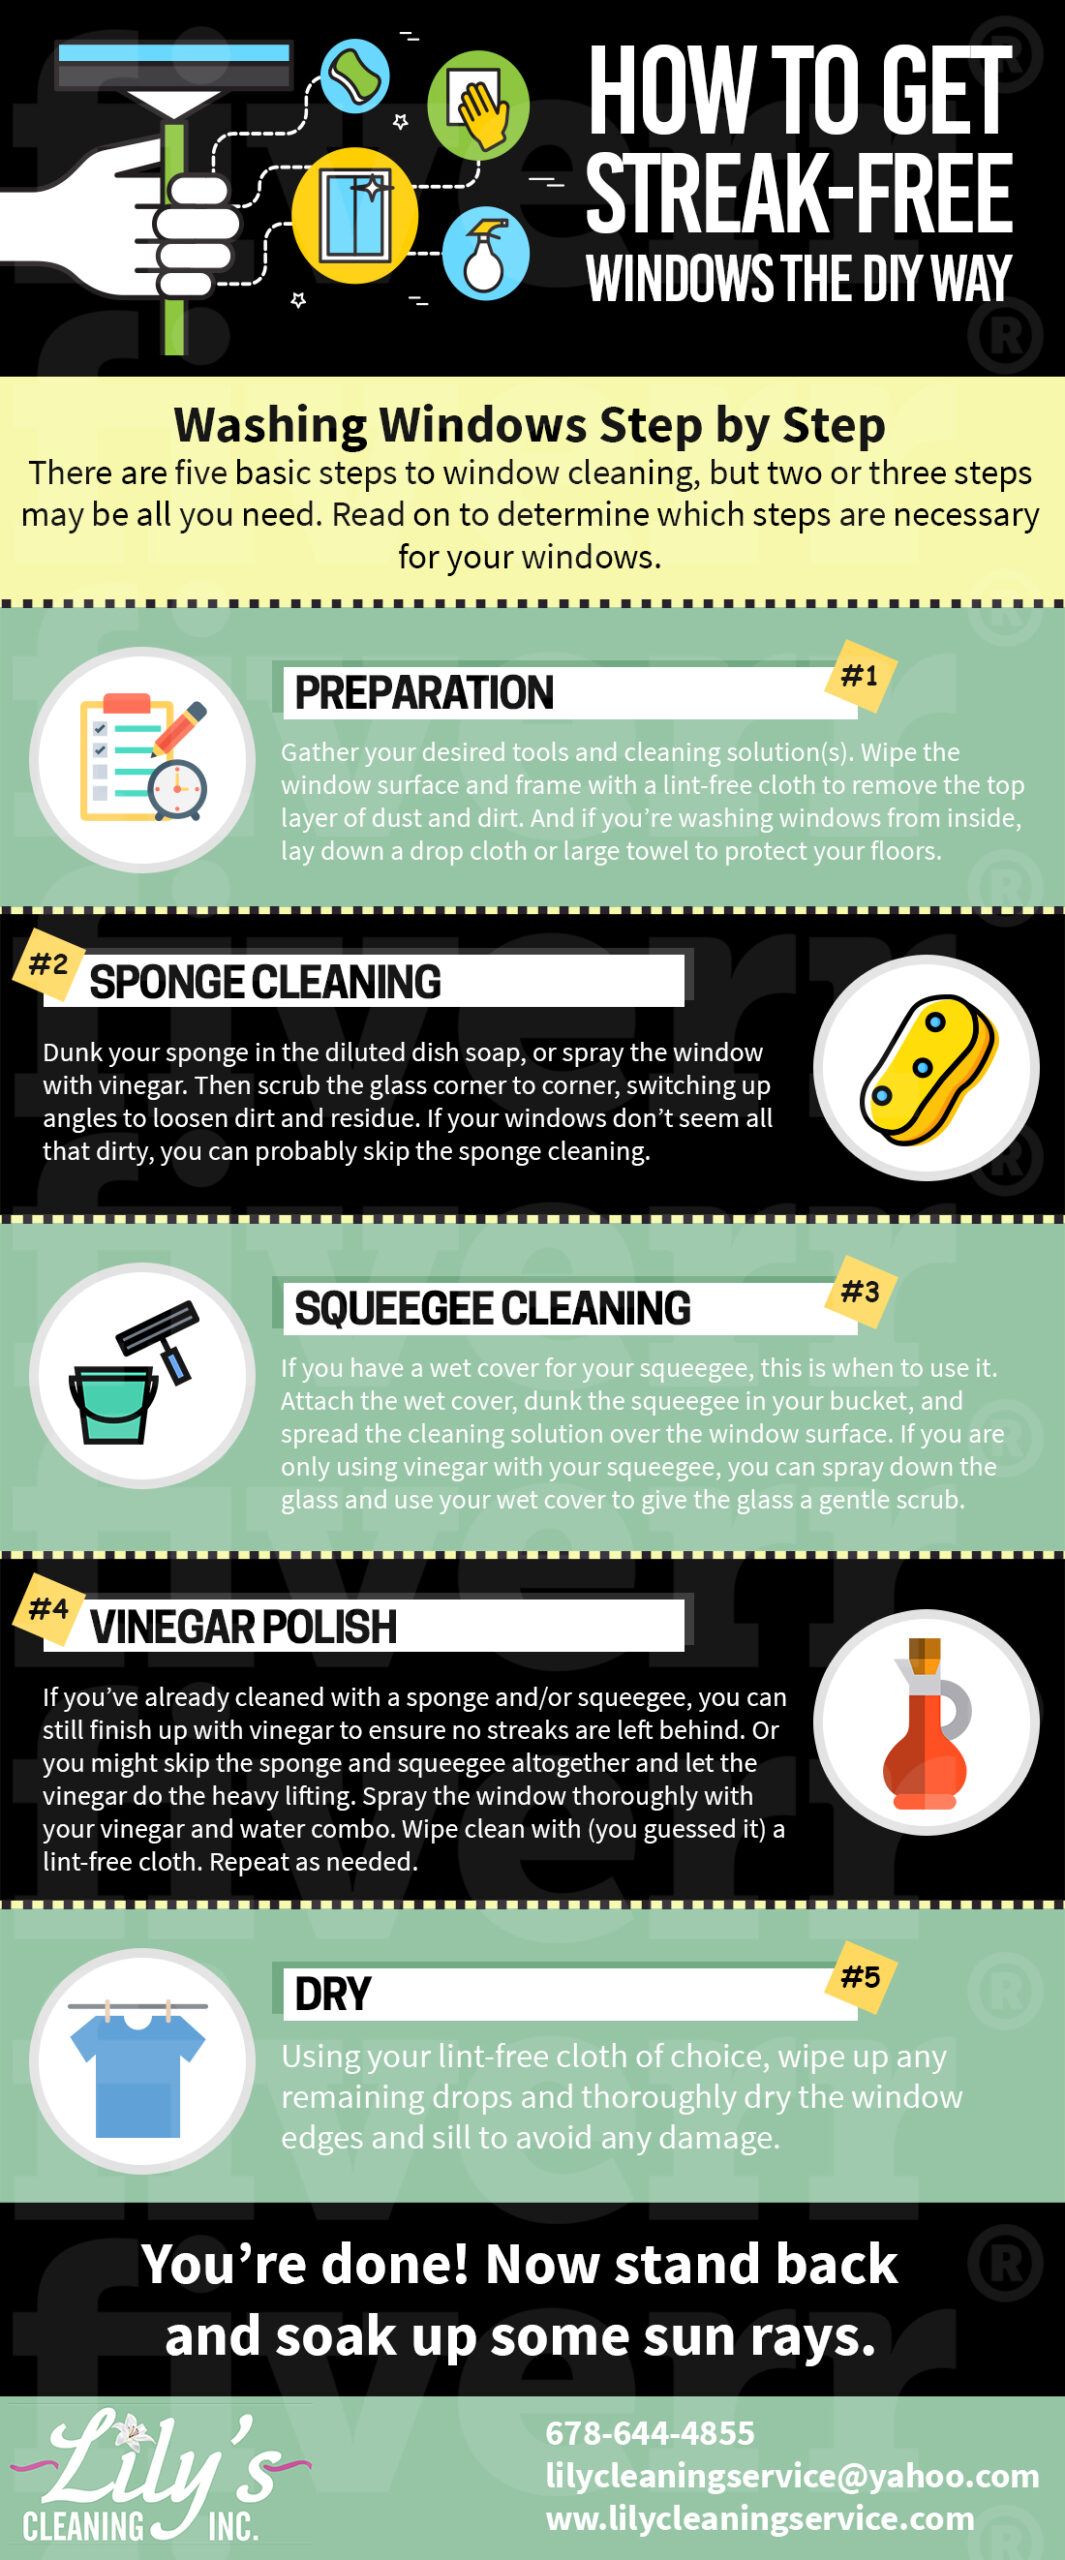 lilys-cleaning-diy-window-cleaning-infographic